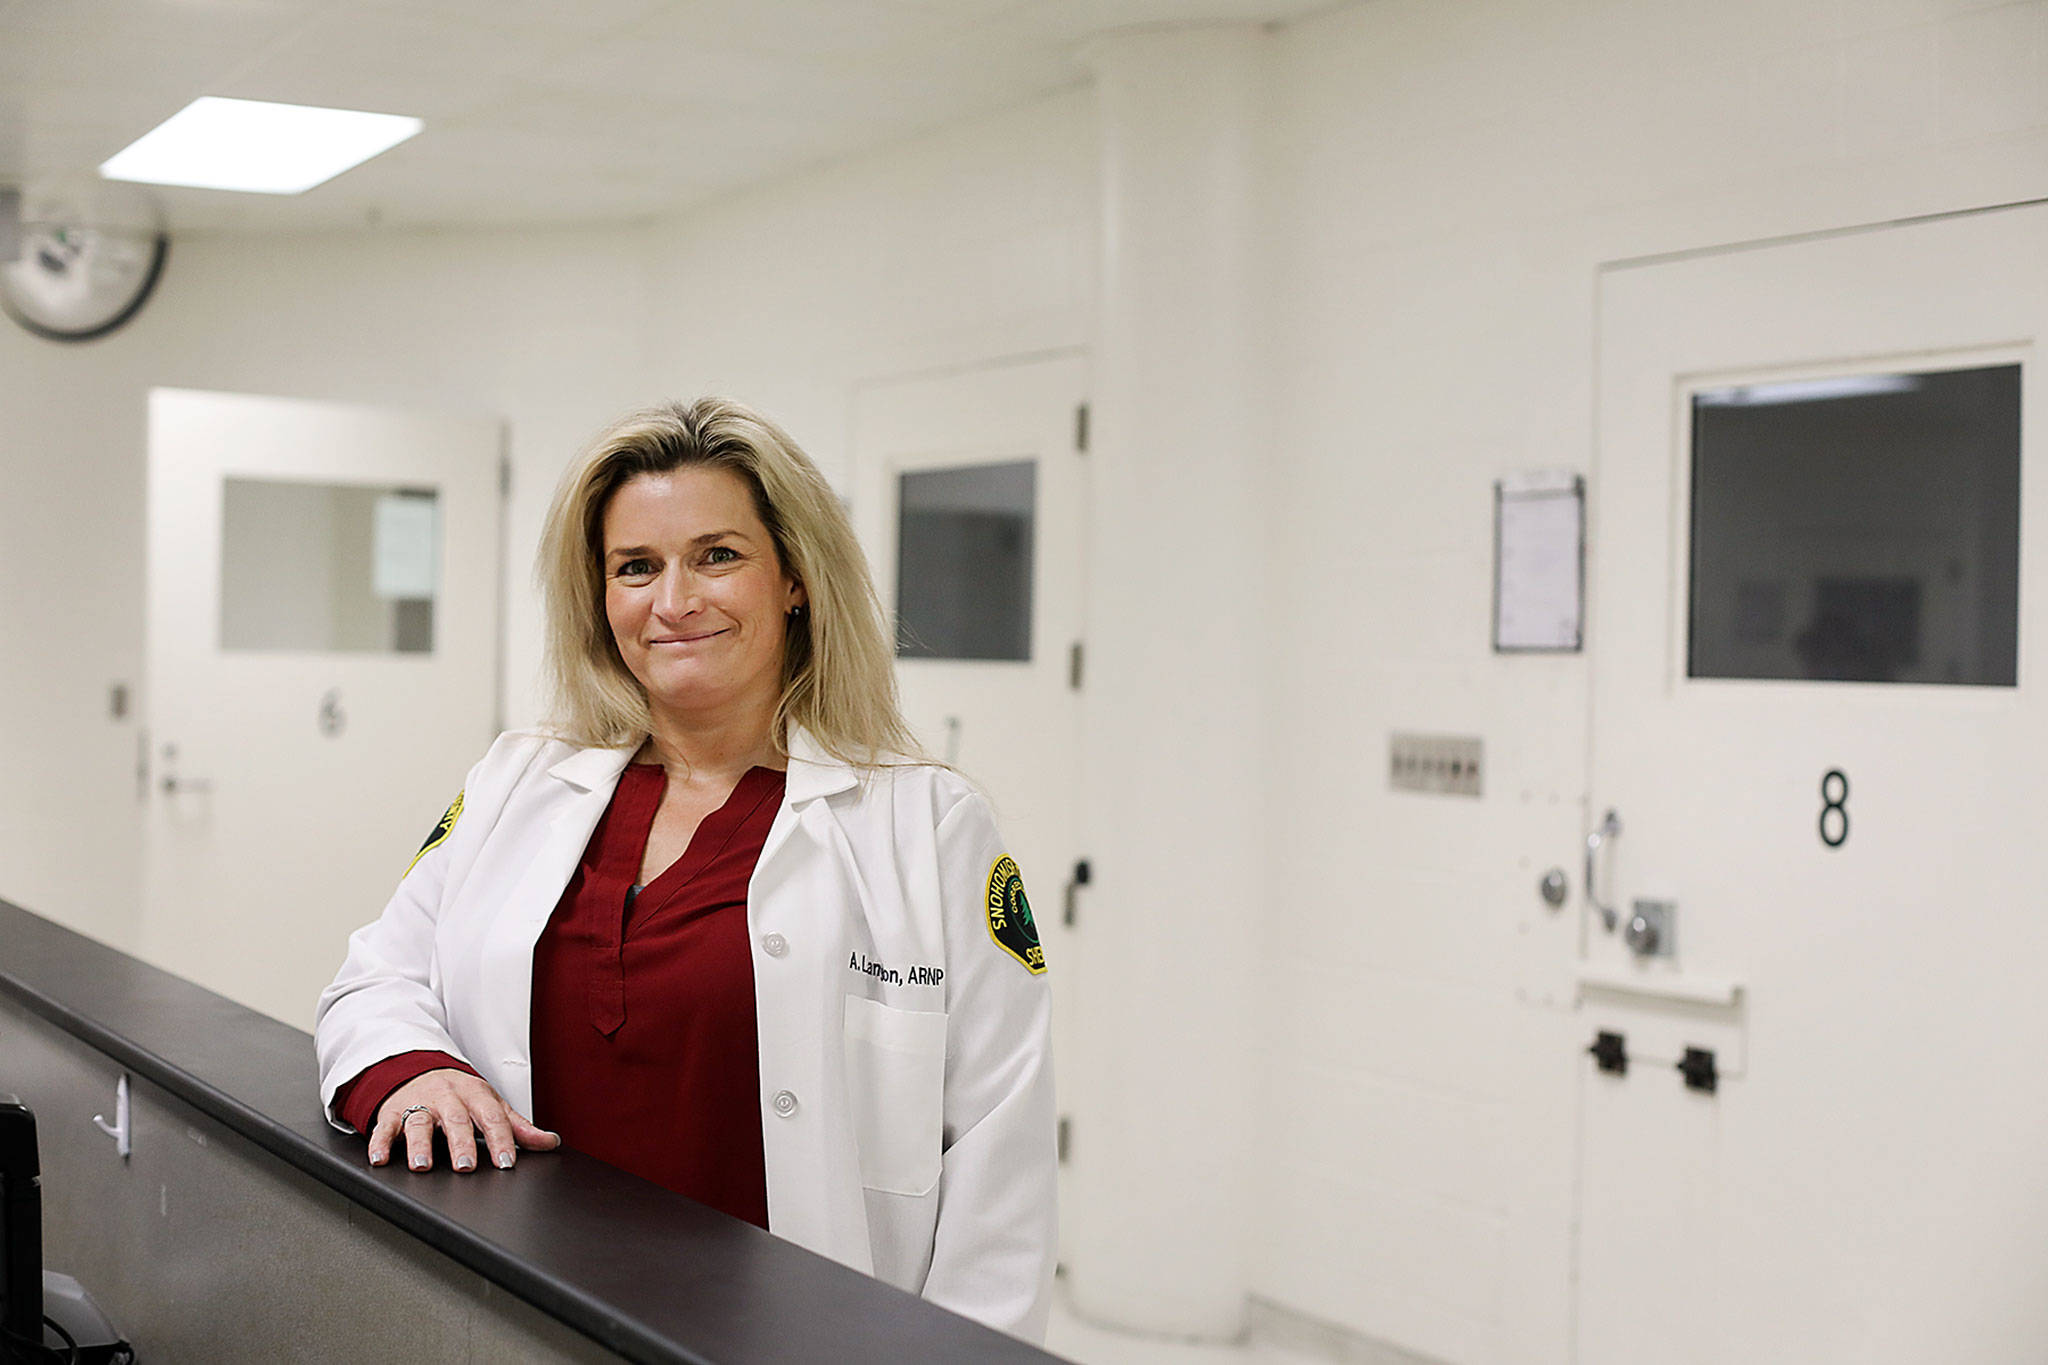 Alta Langdon, a nurse practitioner and health services administrator at the Snohomish County Jail, pushed to bring medication-assisted treatment to inmates to lessen the discomfort and cravings that come with opioid withdrawal. (Lizz Giordano / The Herald)